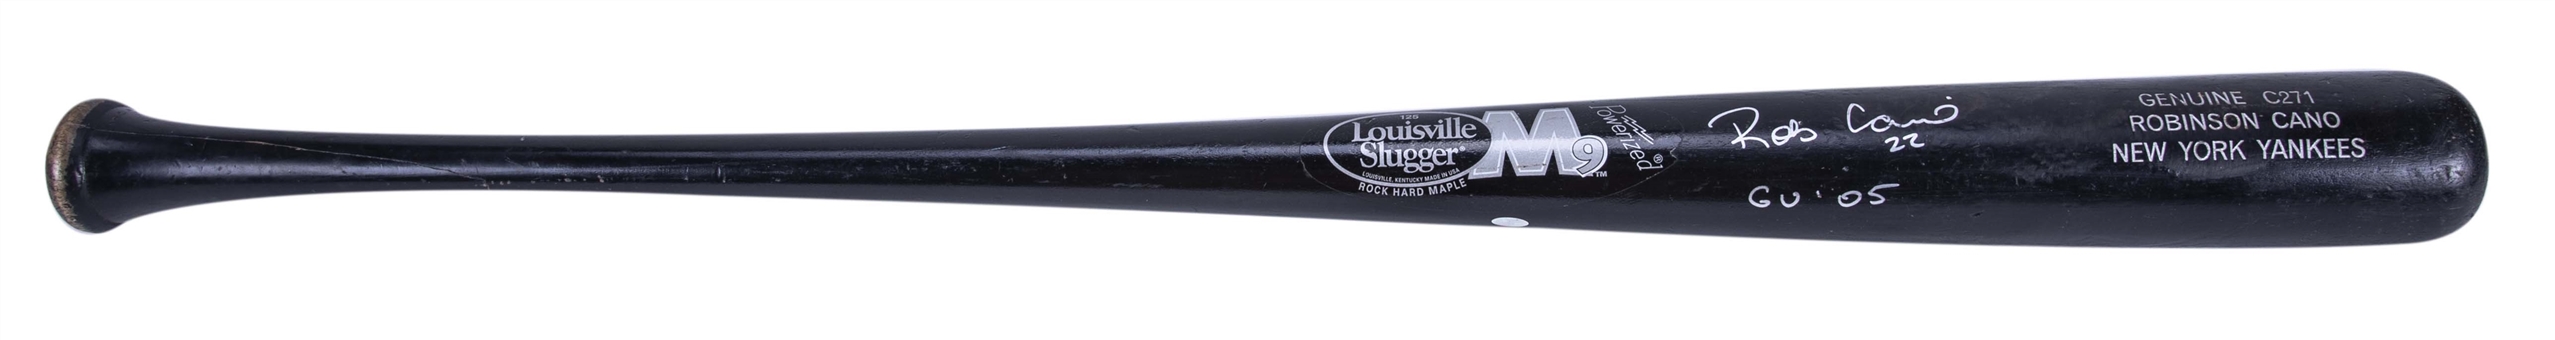 2005 Robinson Cano Rookie Game Used and Signed Louisville Slugger C271 Pro Model Bat (PSA/DNA)